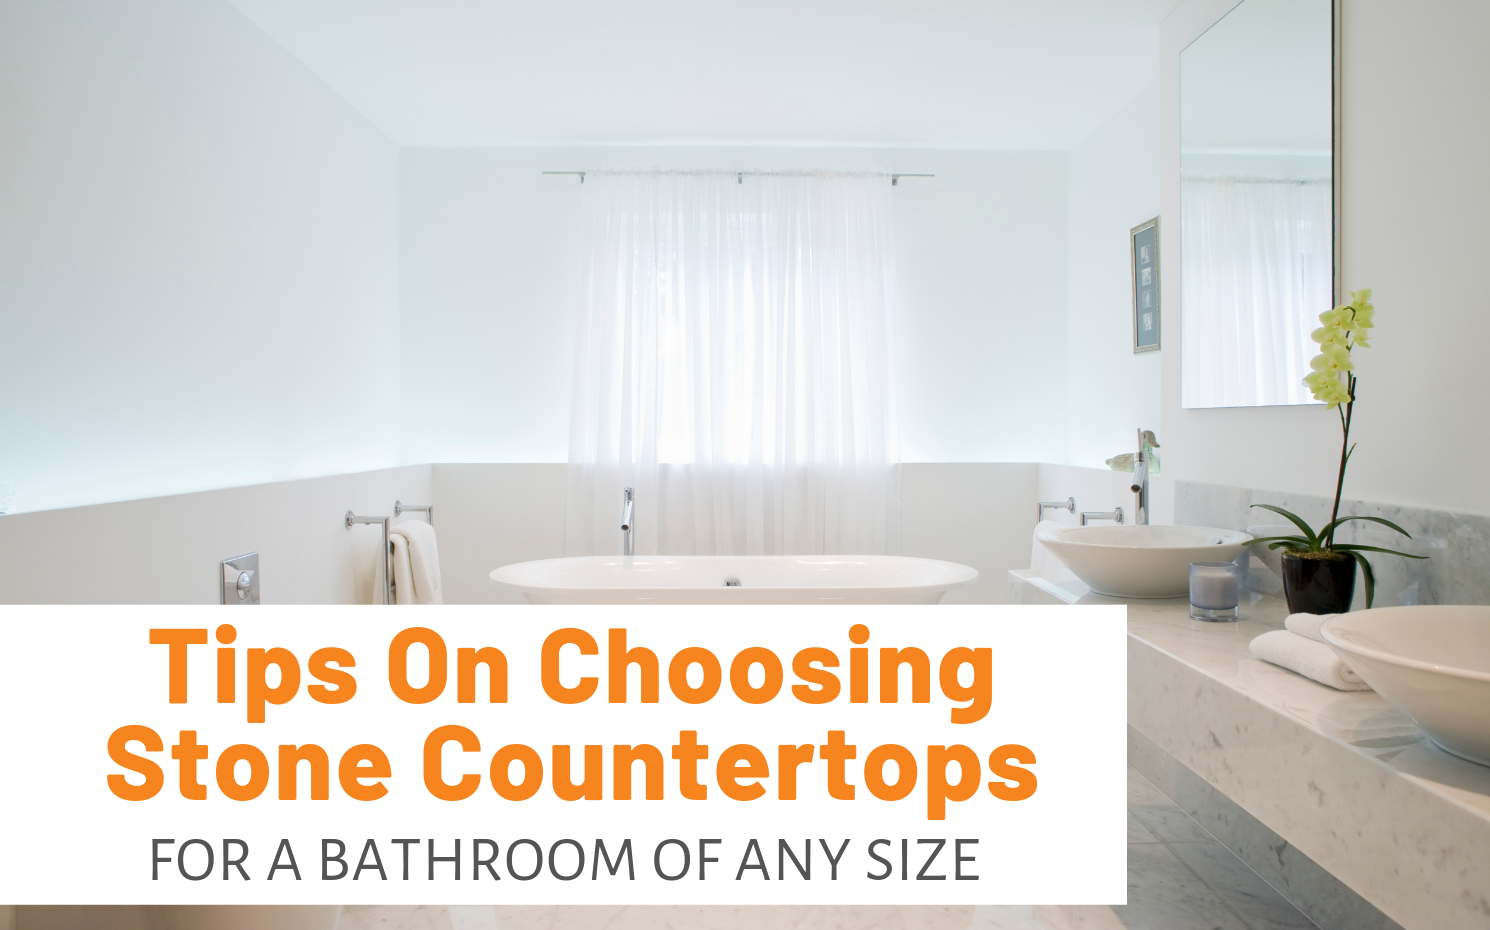 Featured image for "Tips On Choosing Stone Countertops For A Bathroom Of Any Size" blog post